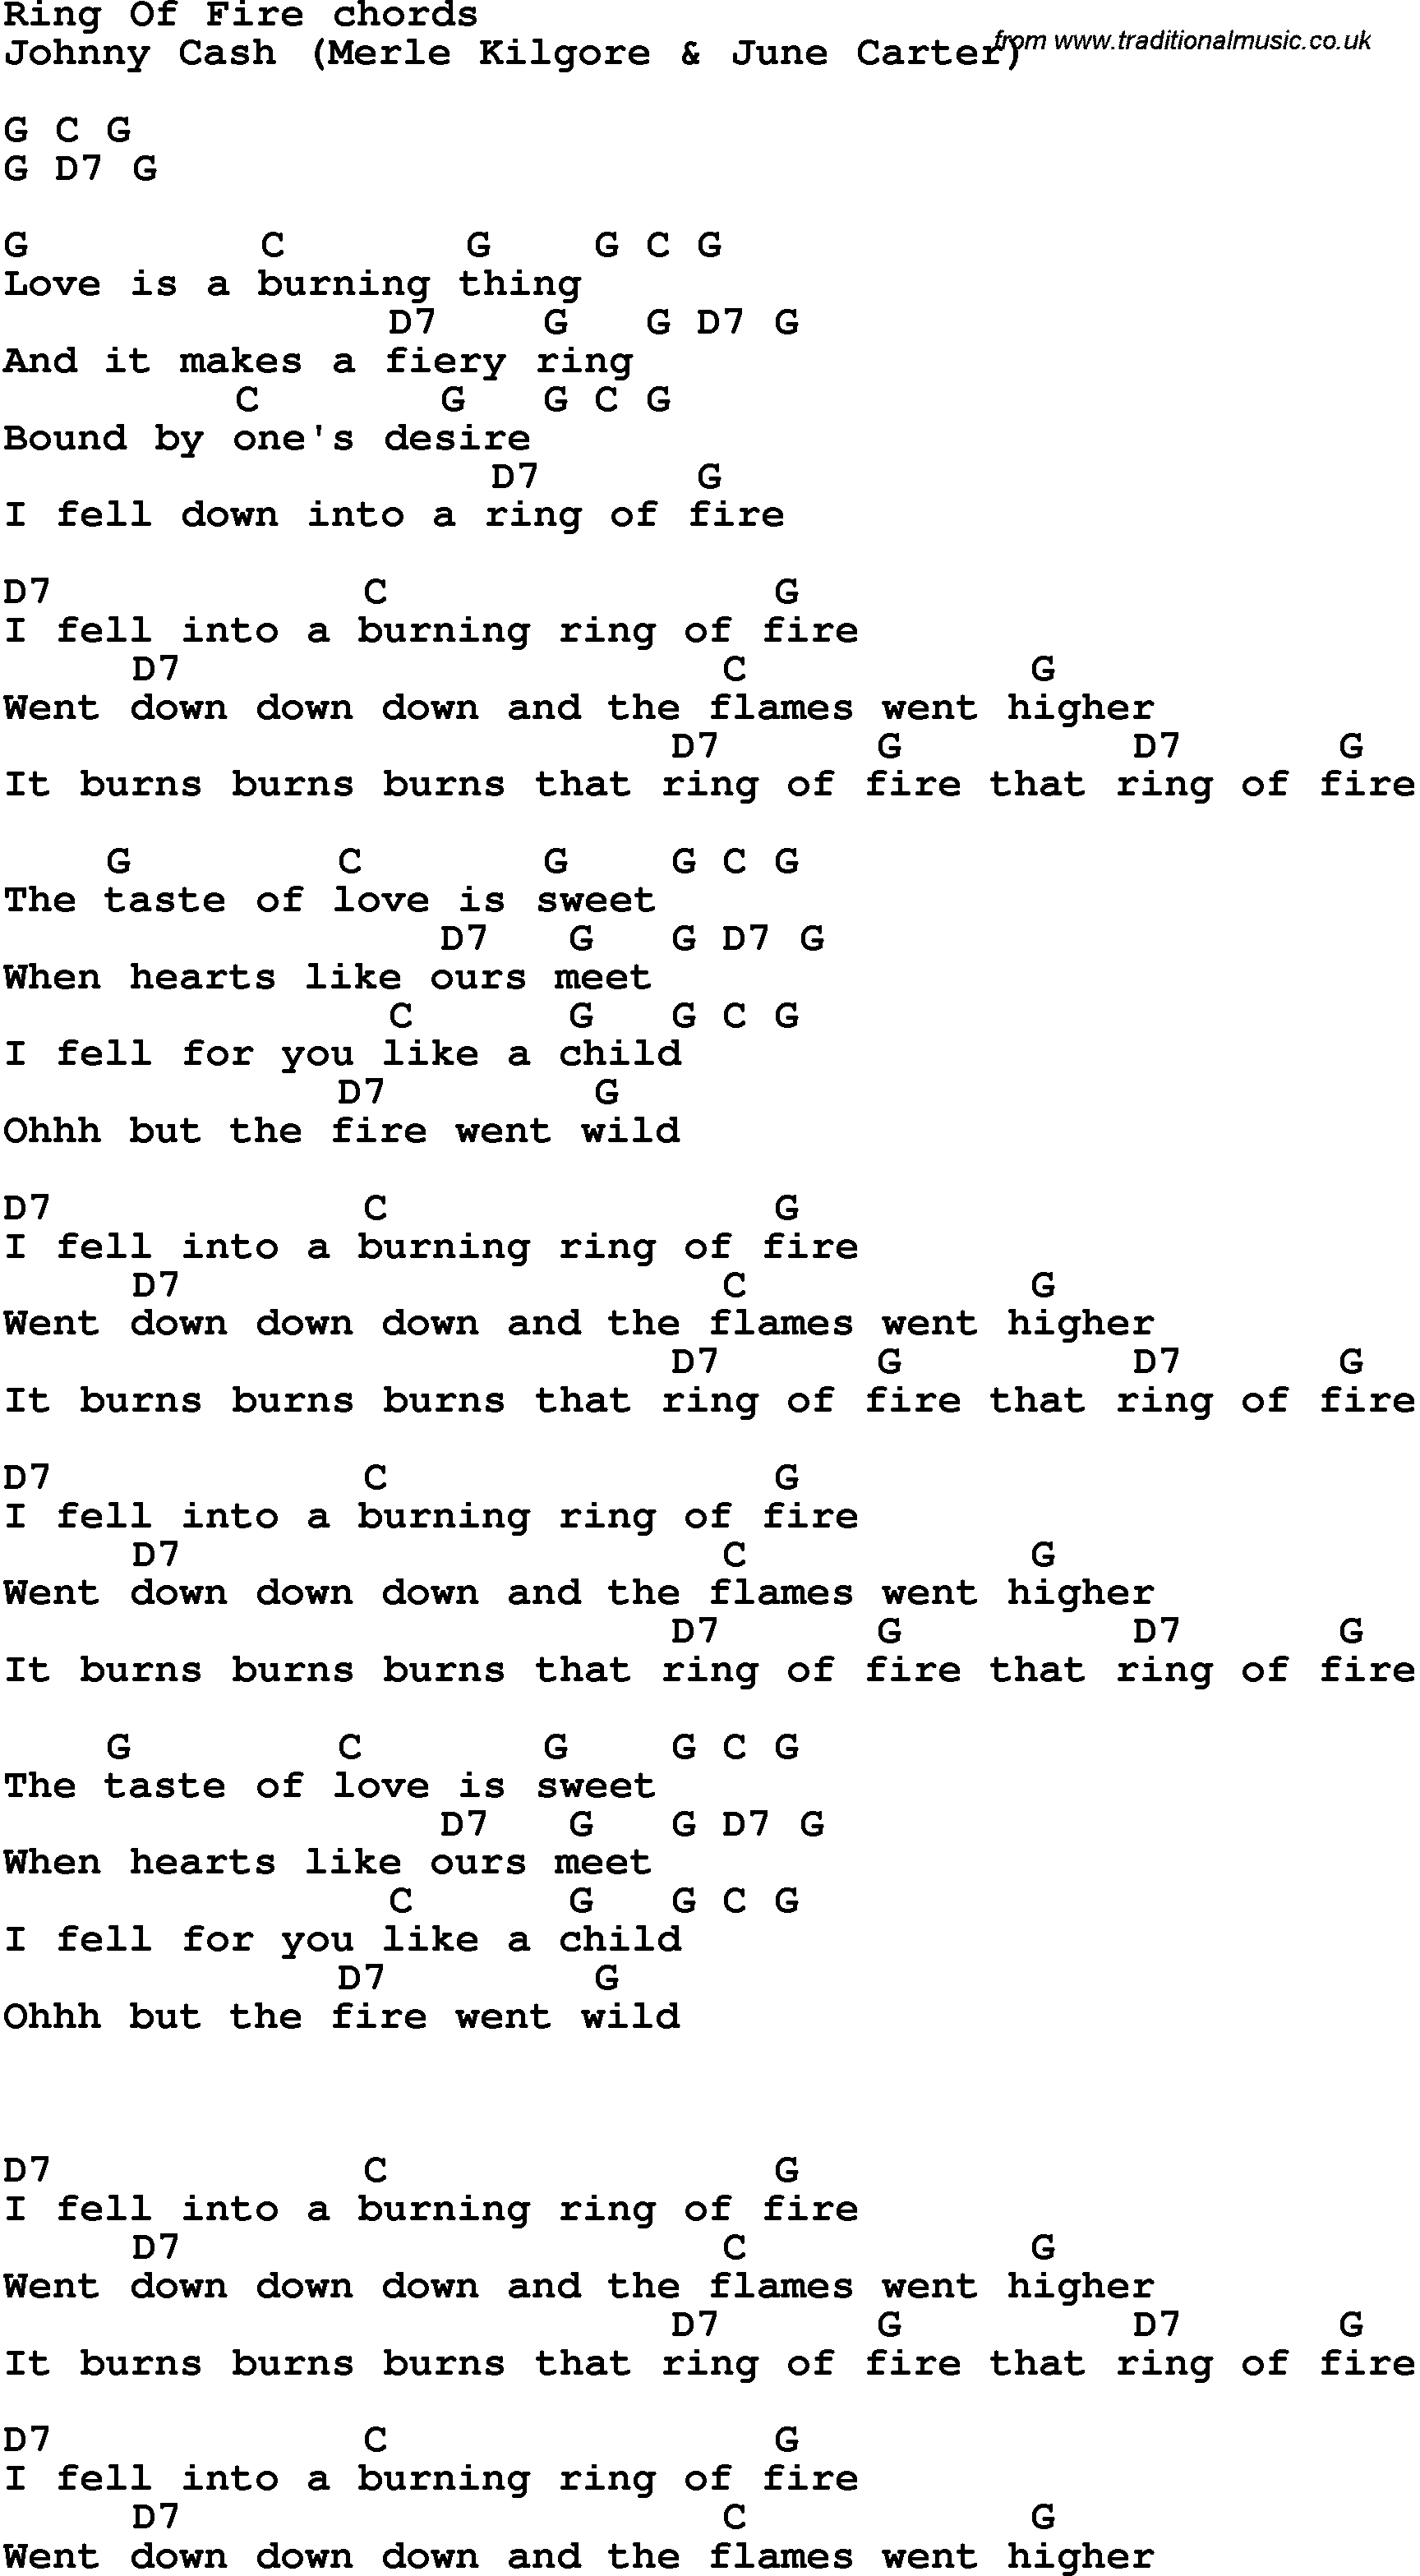 Song Lyrics with guitar chords for Ring Of Fire